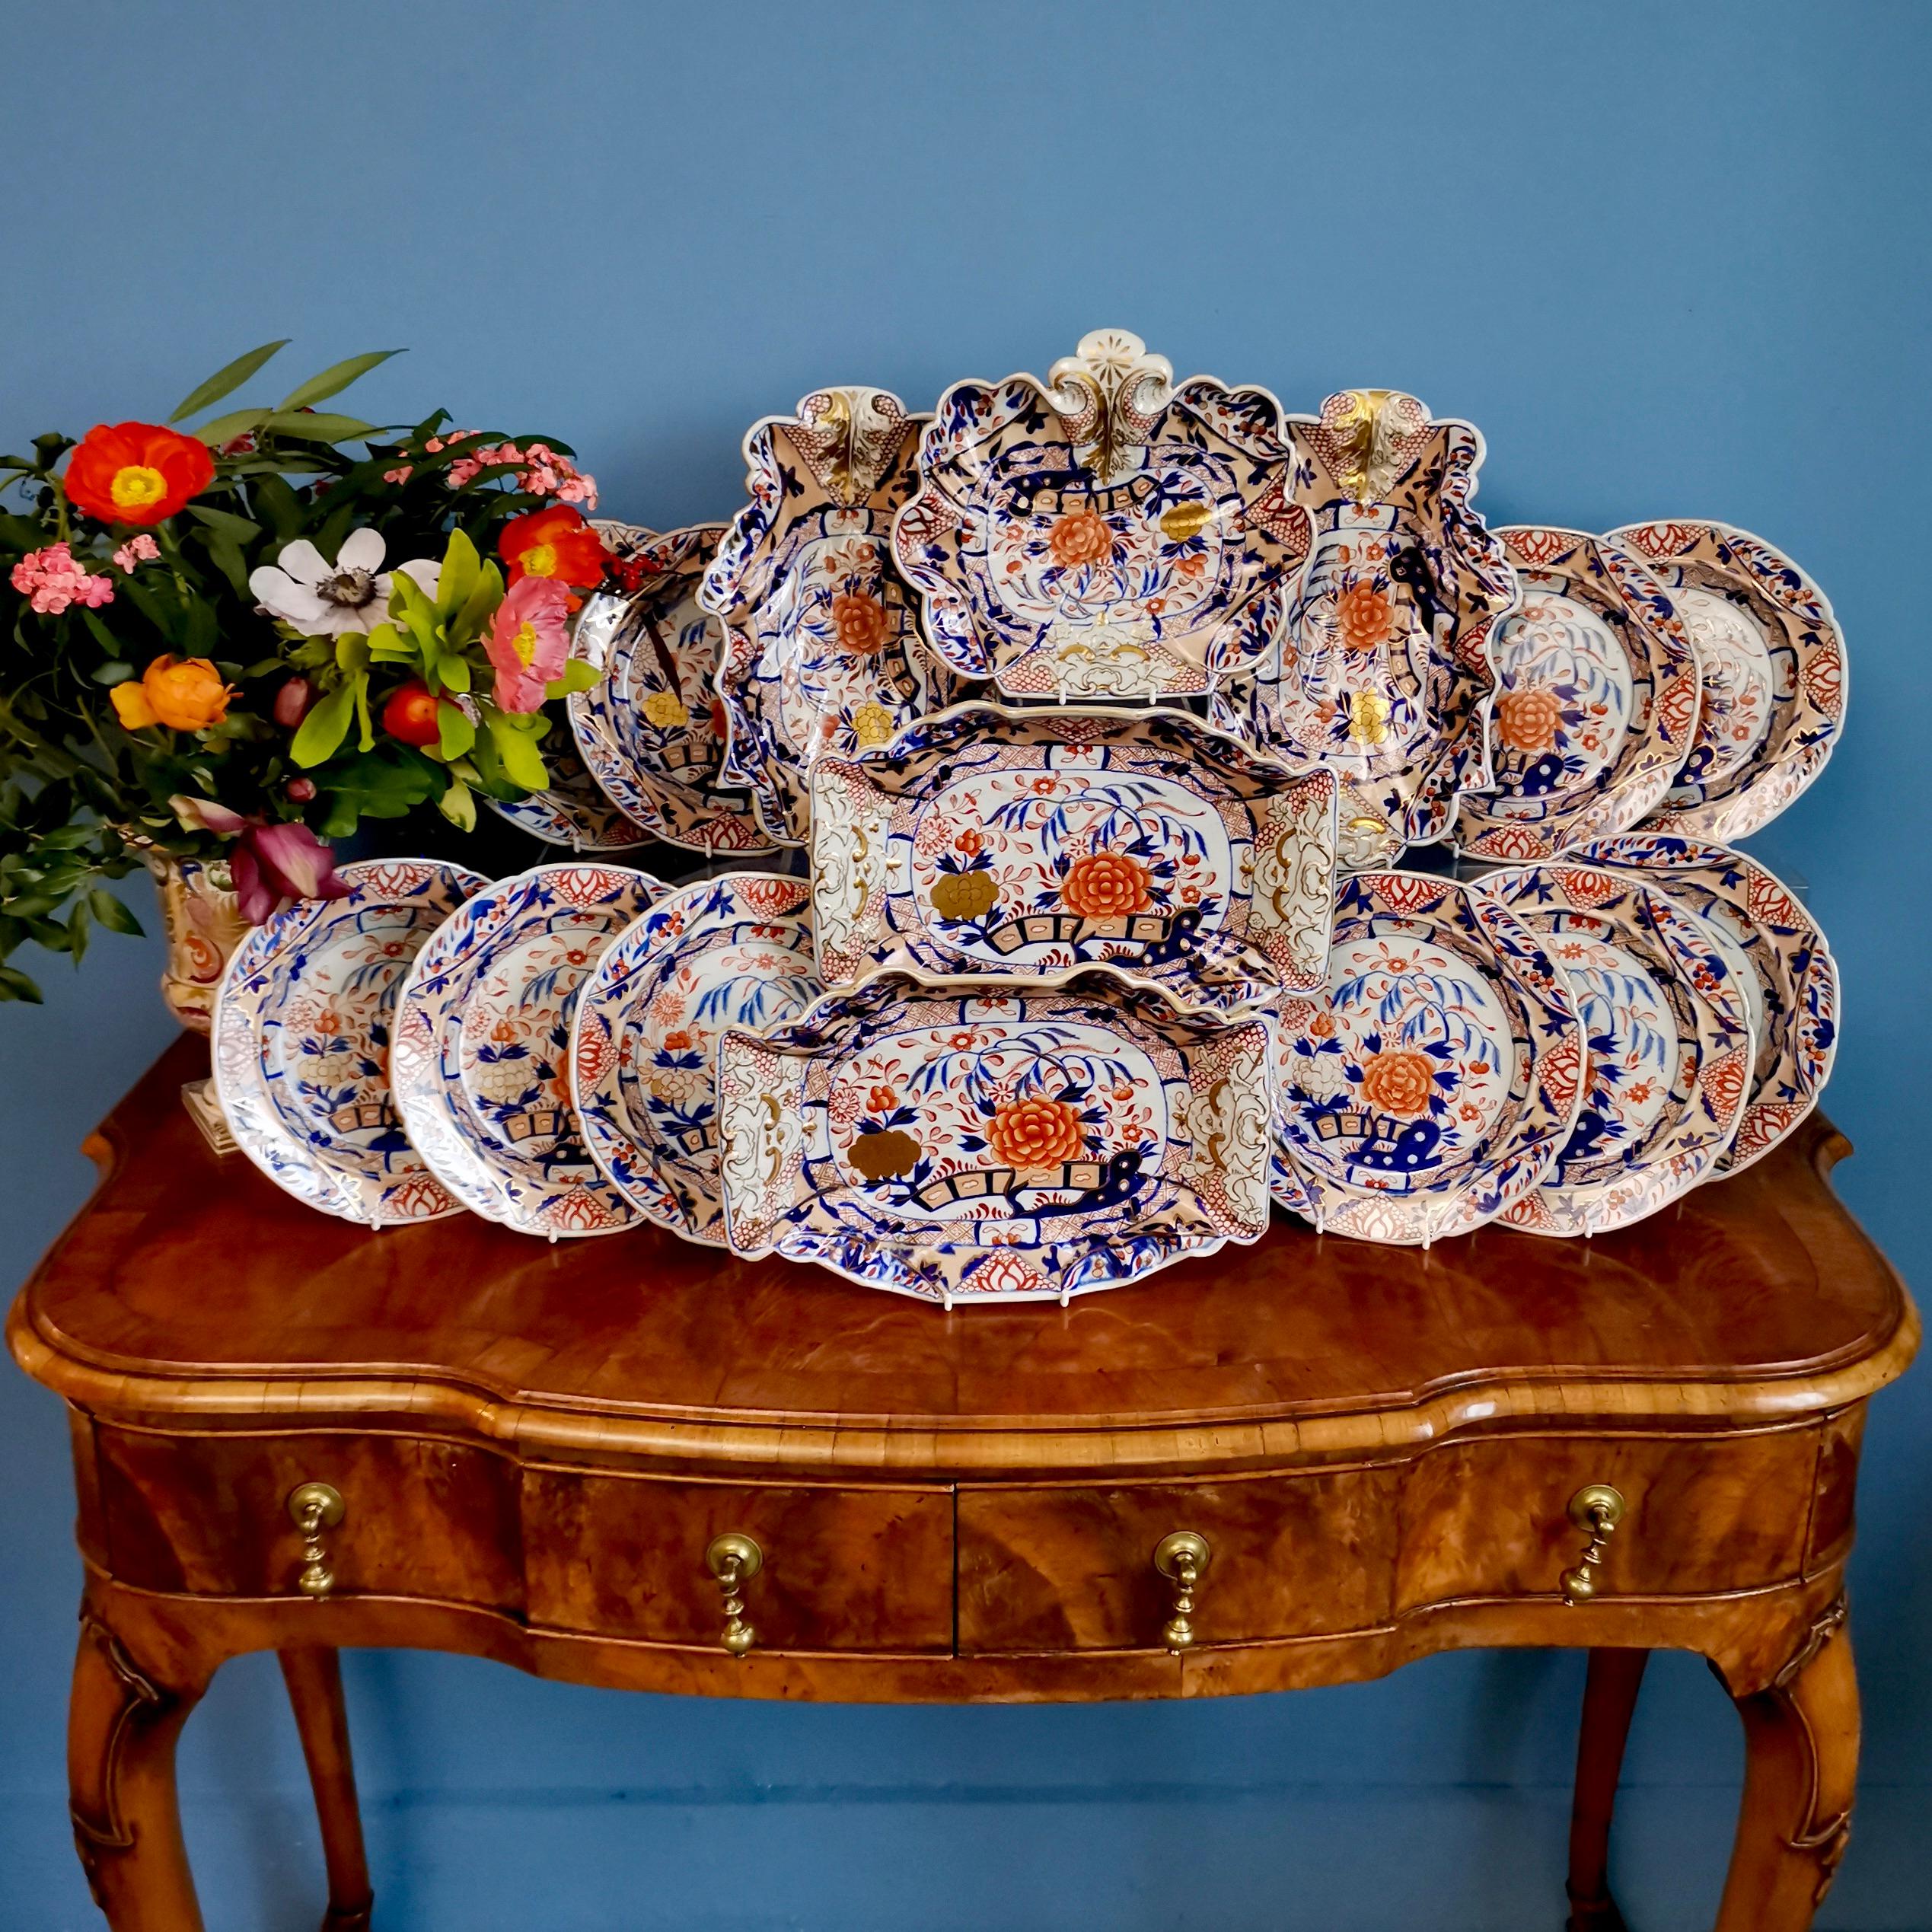 This is a wonderful dessert service made by Miles Mason between 1813 and 1820. It is made of Patent Ironstone China, decorated in the 